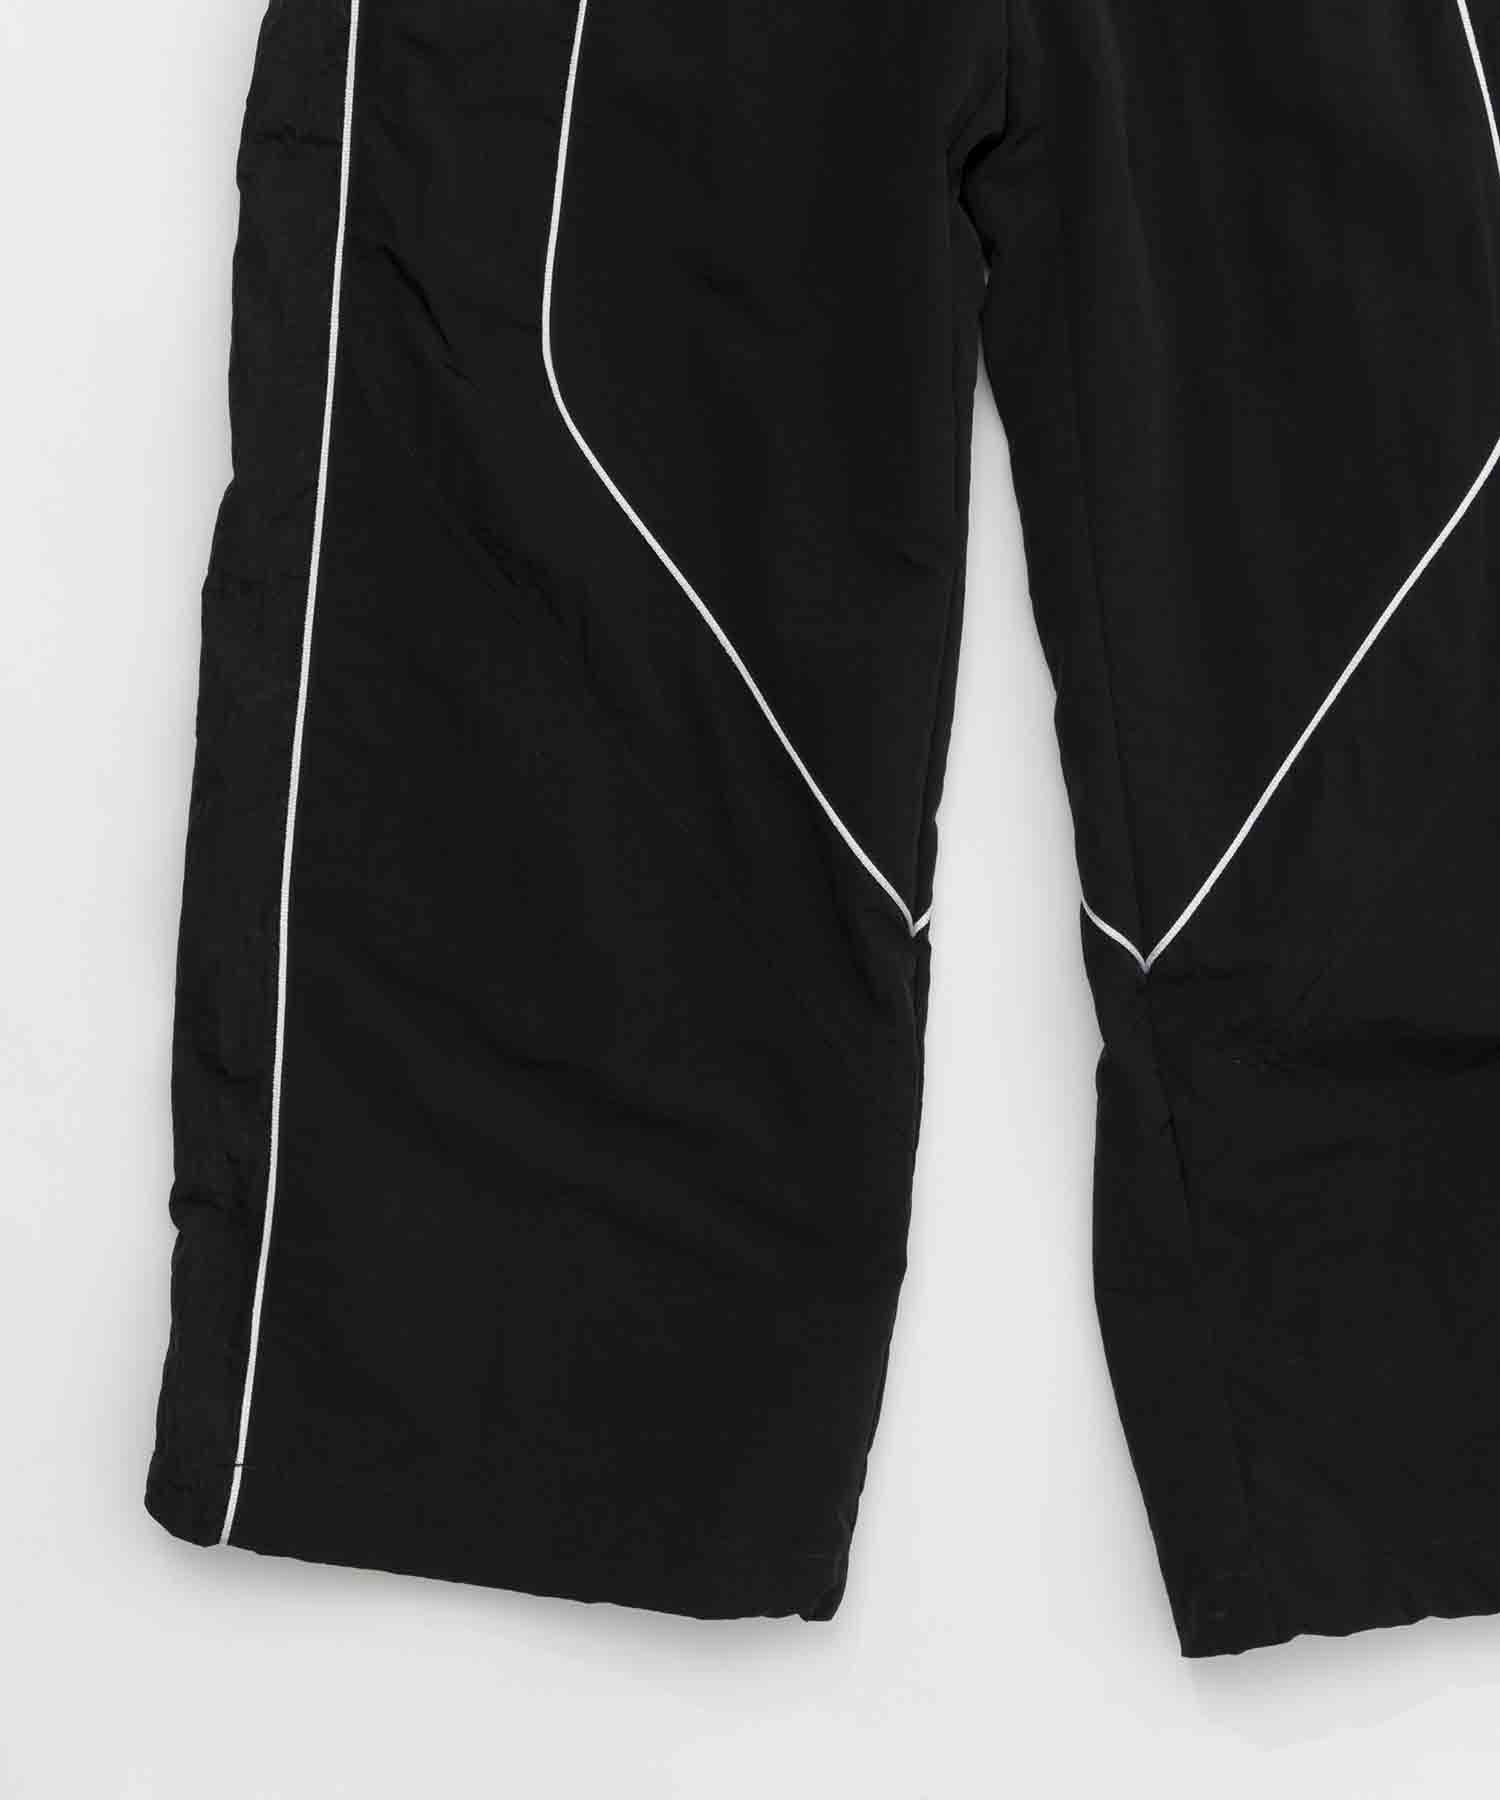 【23AW PRE-ORDER】Different Material Combination Truck Pants